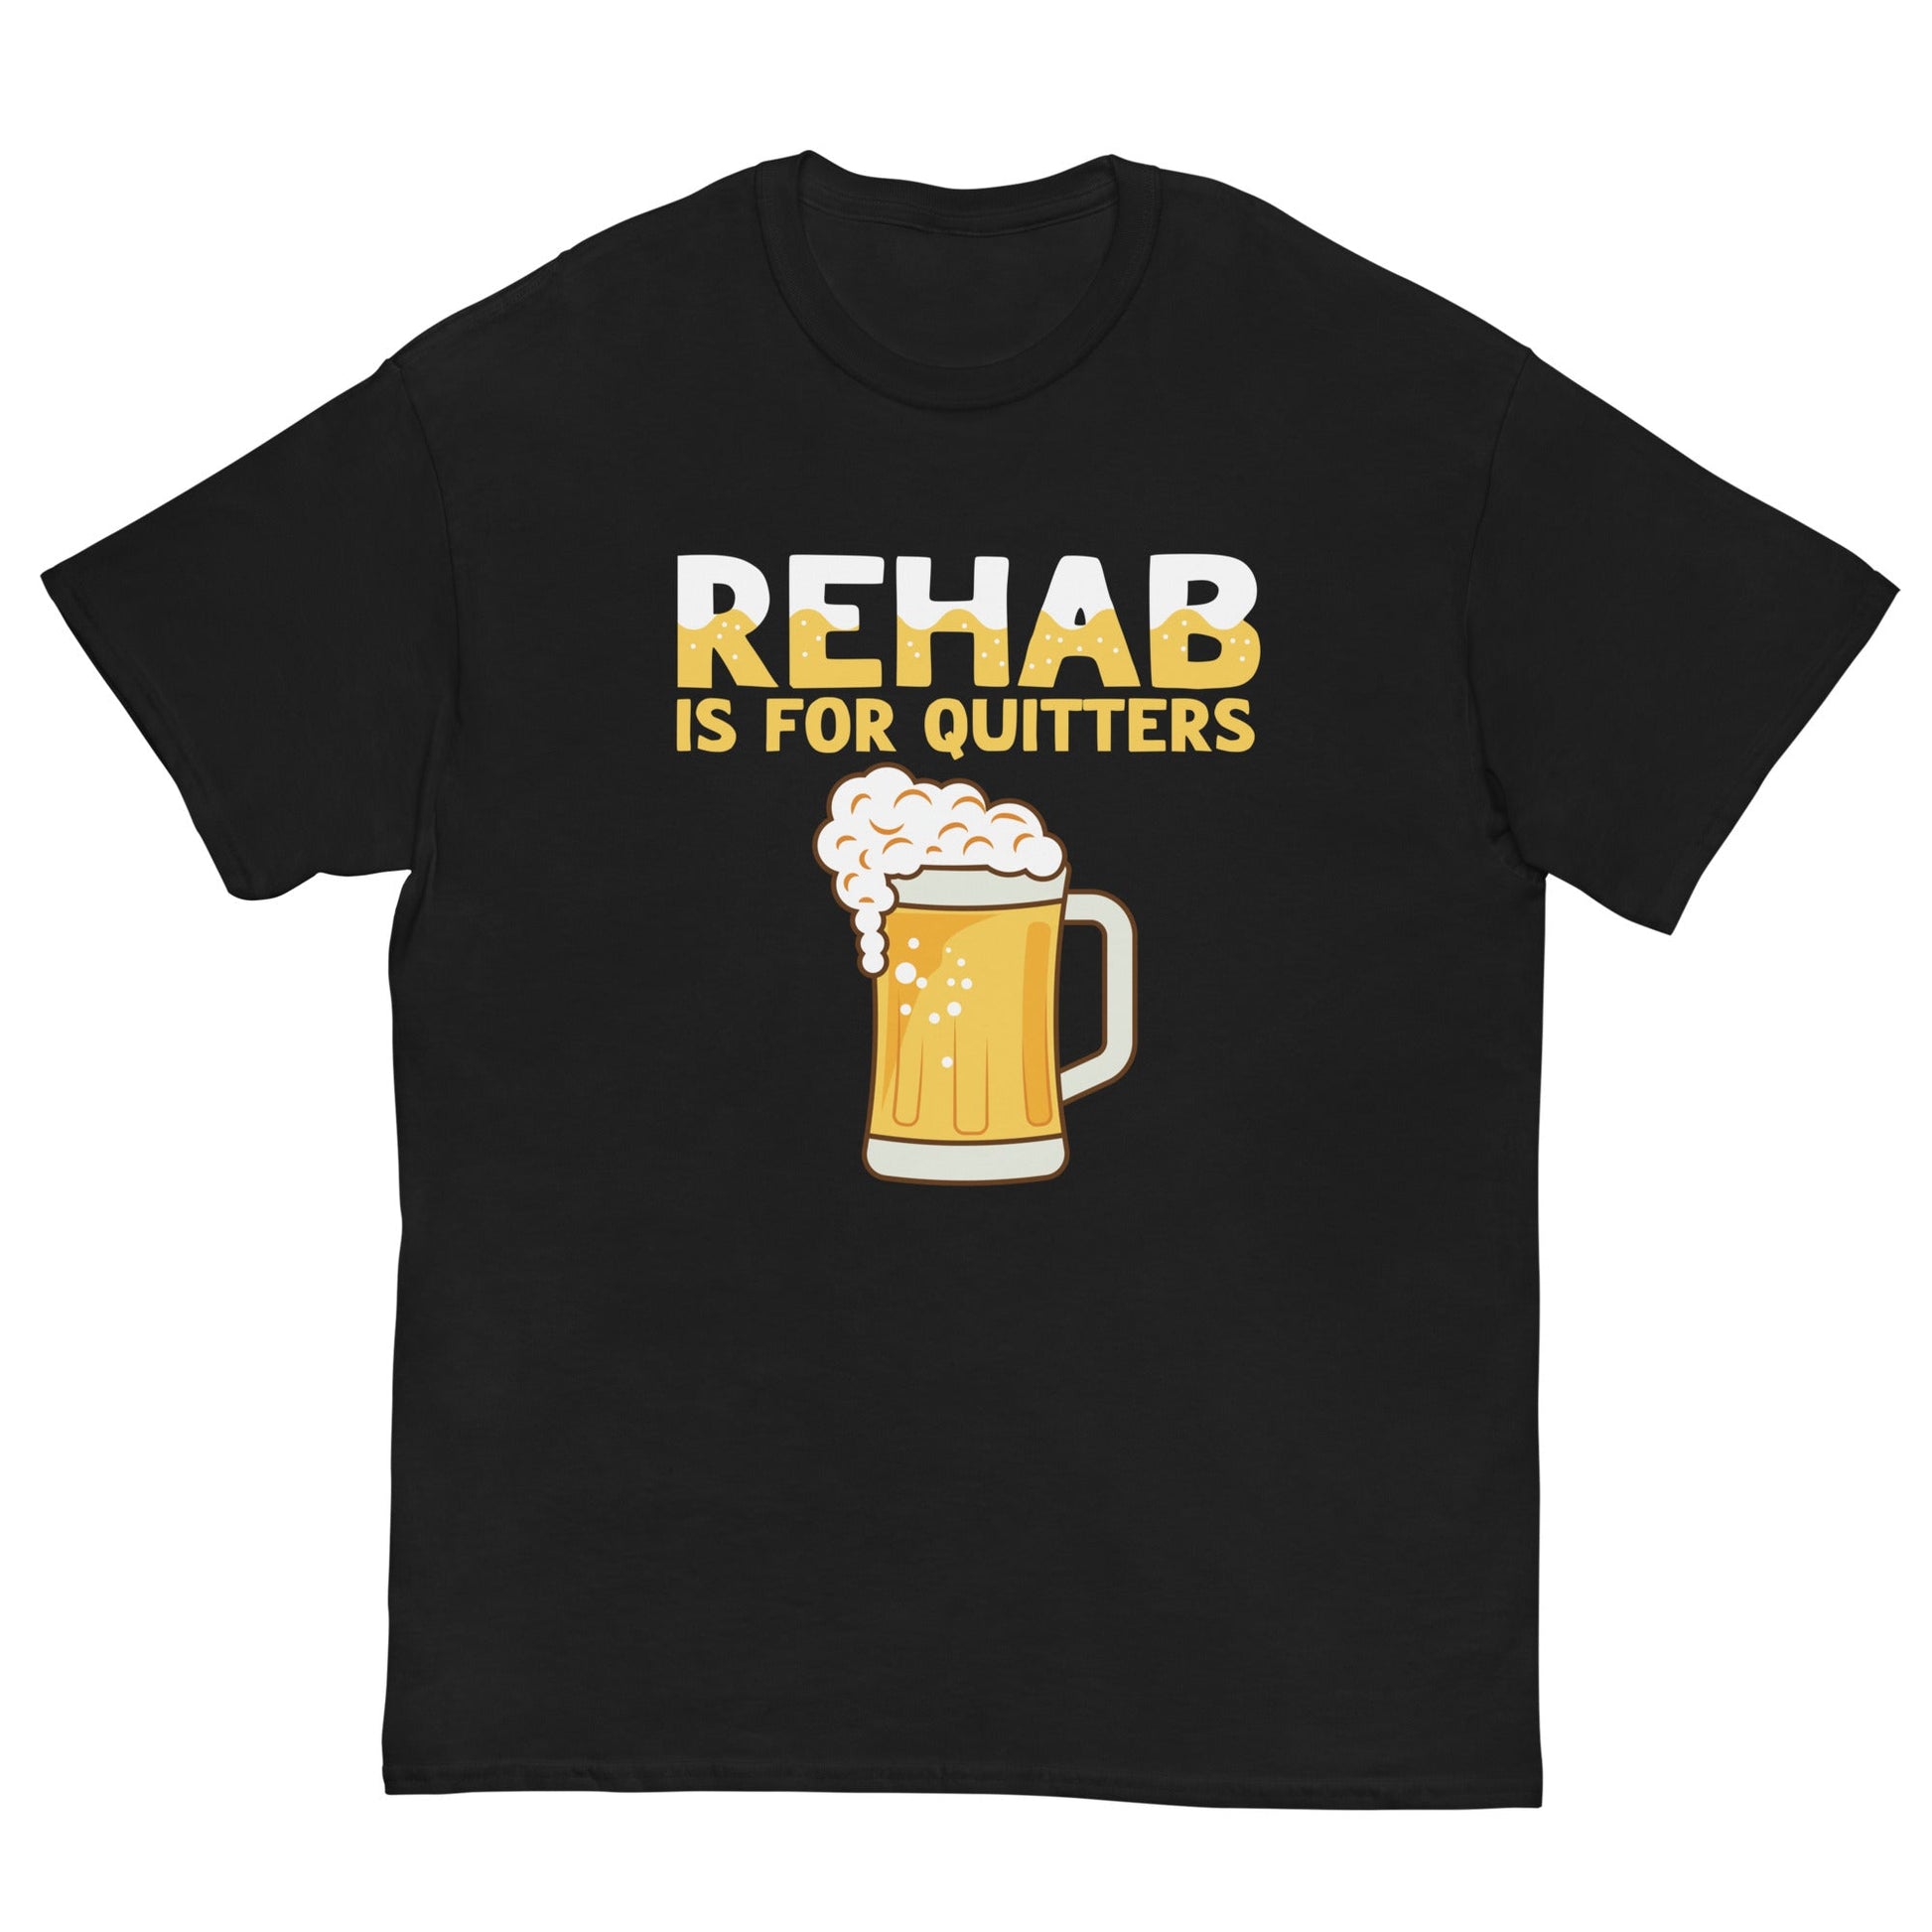 REHAB IS FOR QUITTERS - HardShirts